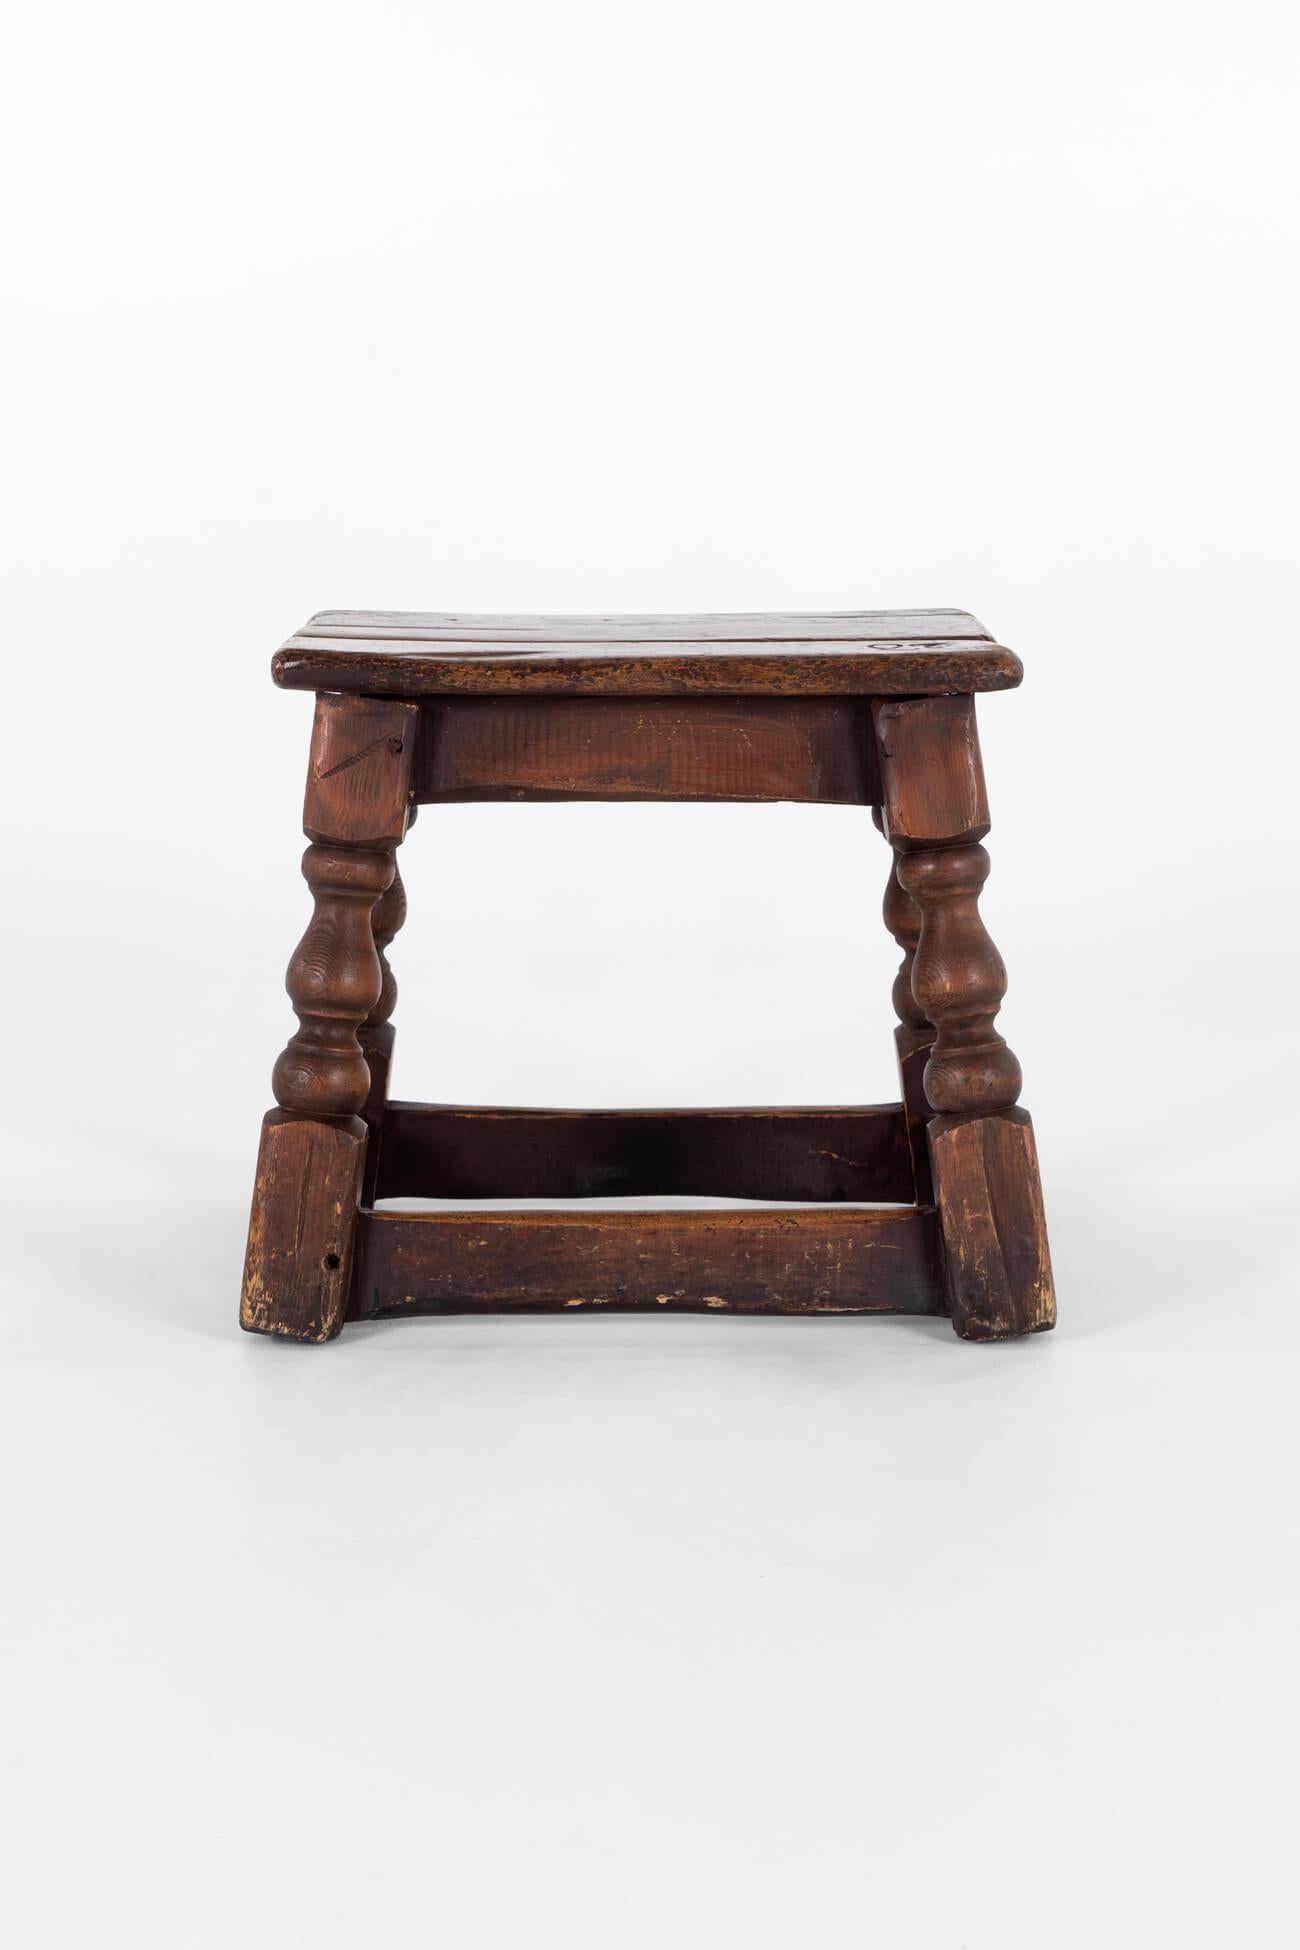 Rustic Early 18th Century Oak Stool For Sale